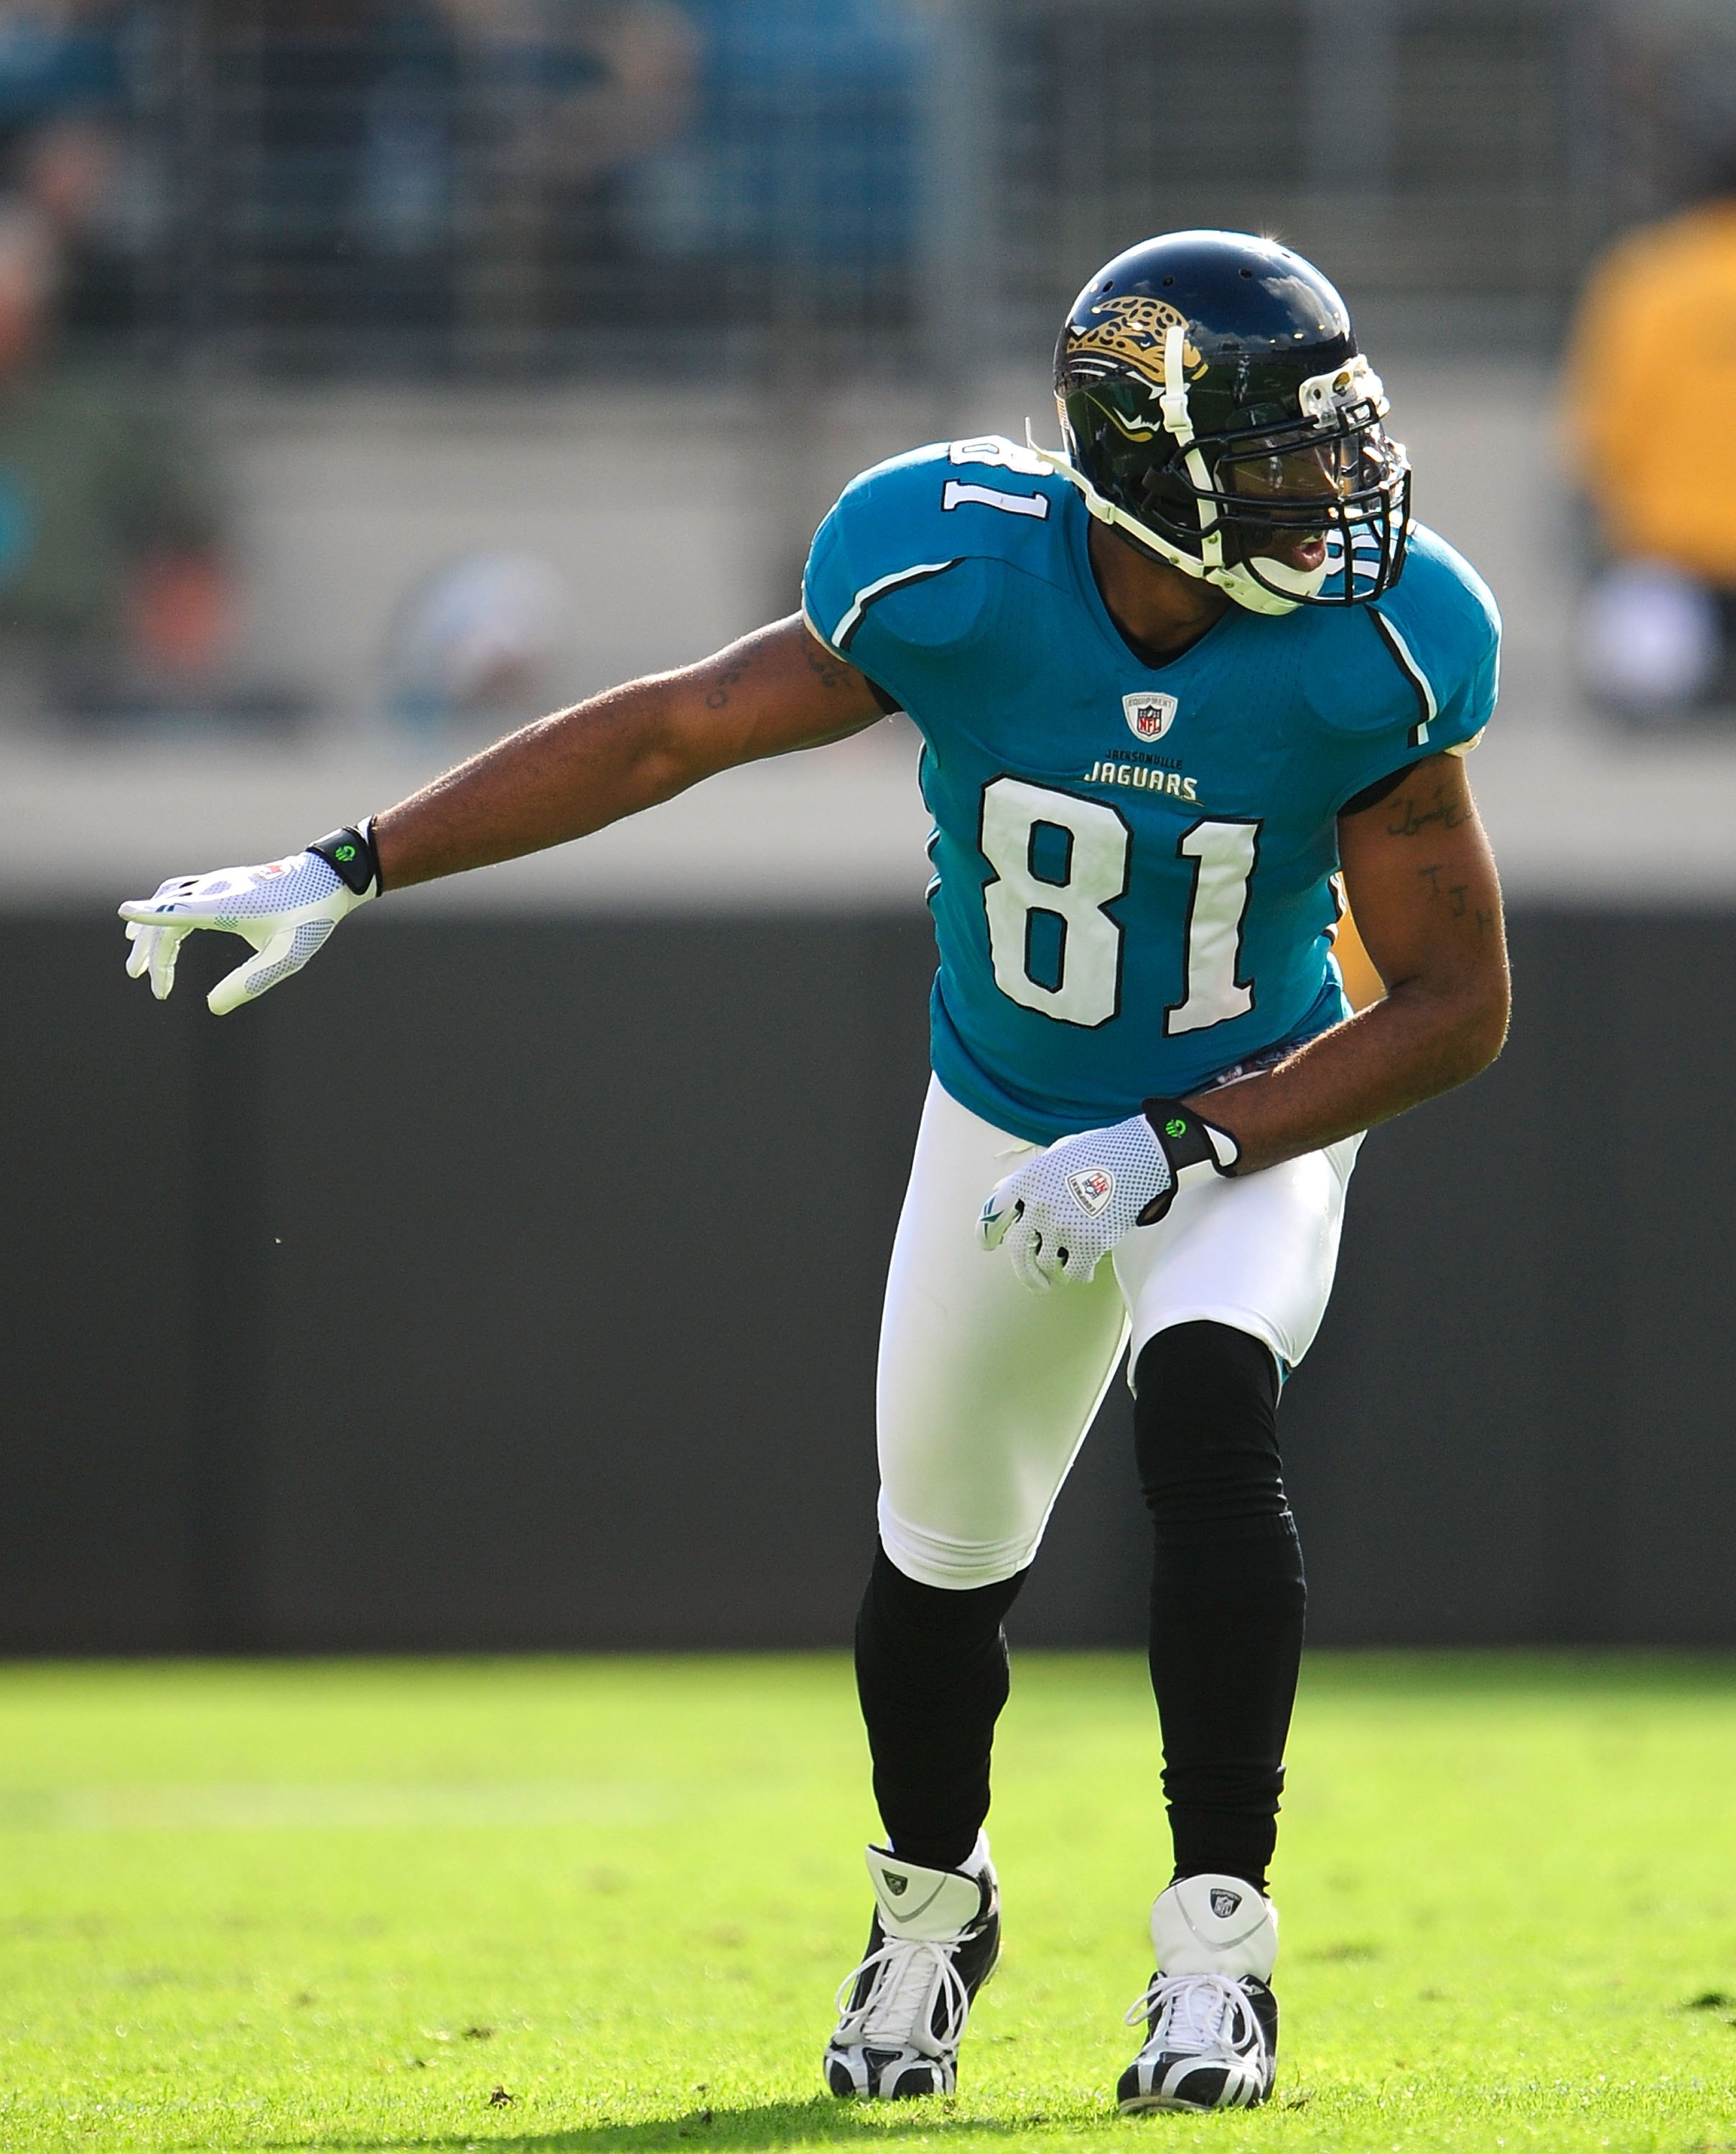 JACKSONVILLE, FL - DECEMBER 13:  Torry Holt #81 of the Jacksonville Jaguars prepares to run a route during the game against the Miami Dolphins at Jacksonville Municipal Stadium on December 13, 2009 in Jacksonville, Florida.  (Photo by Sam Greenwood/Getty 